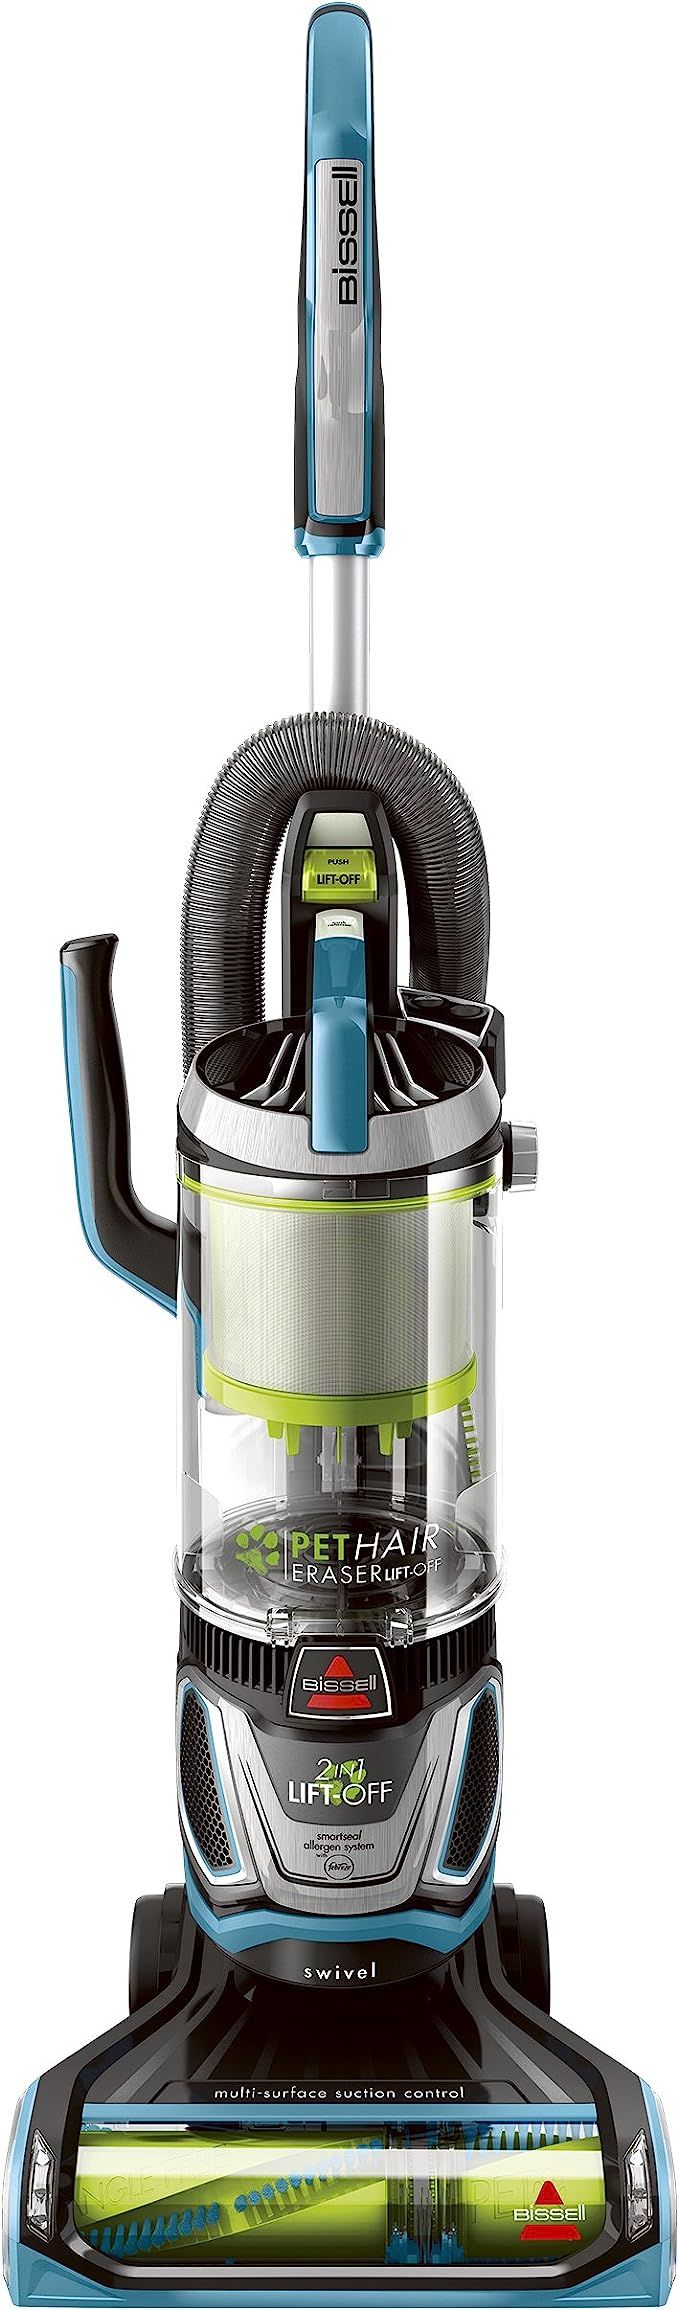 Bissell Pet Hair Eraser Lift Off Bagless Upright Vacuum | Amazon (US)